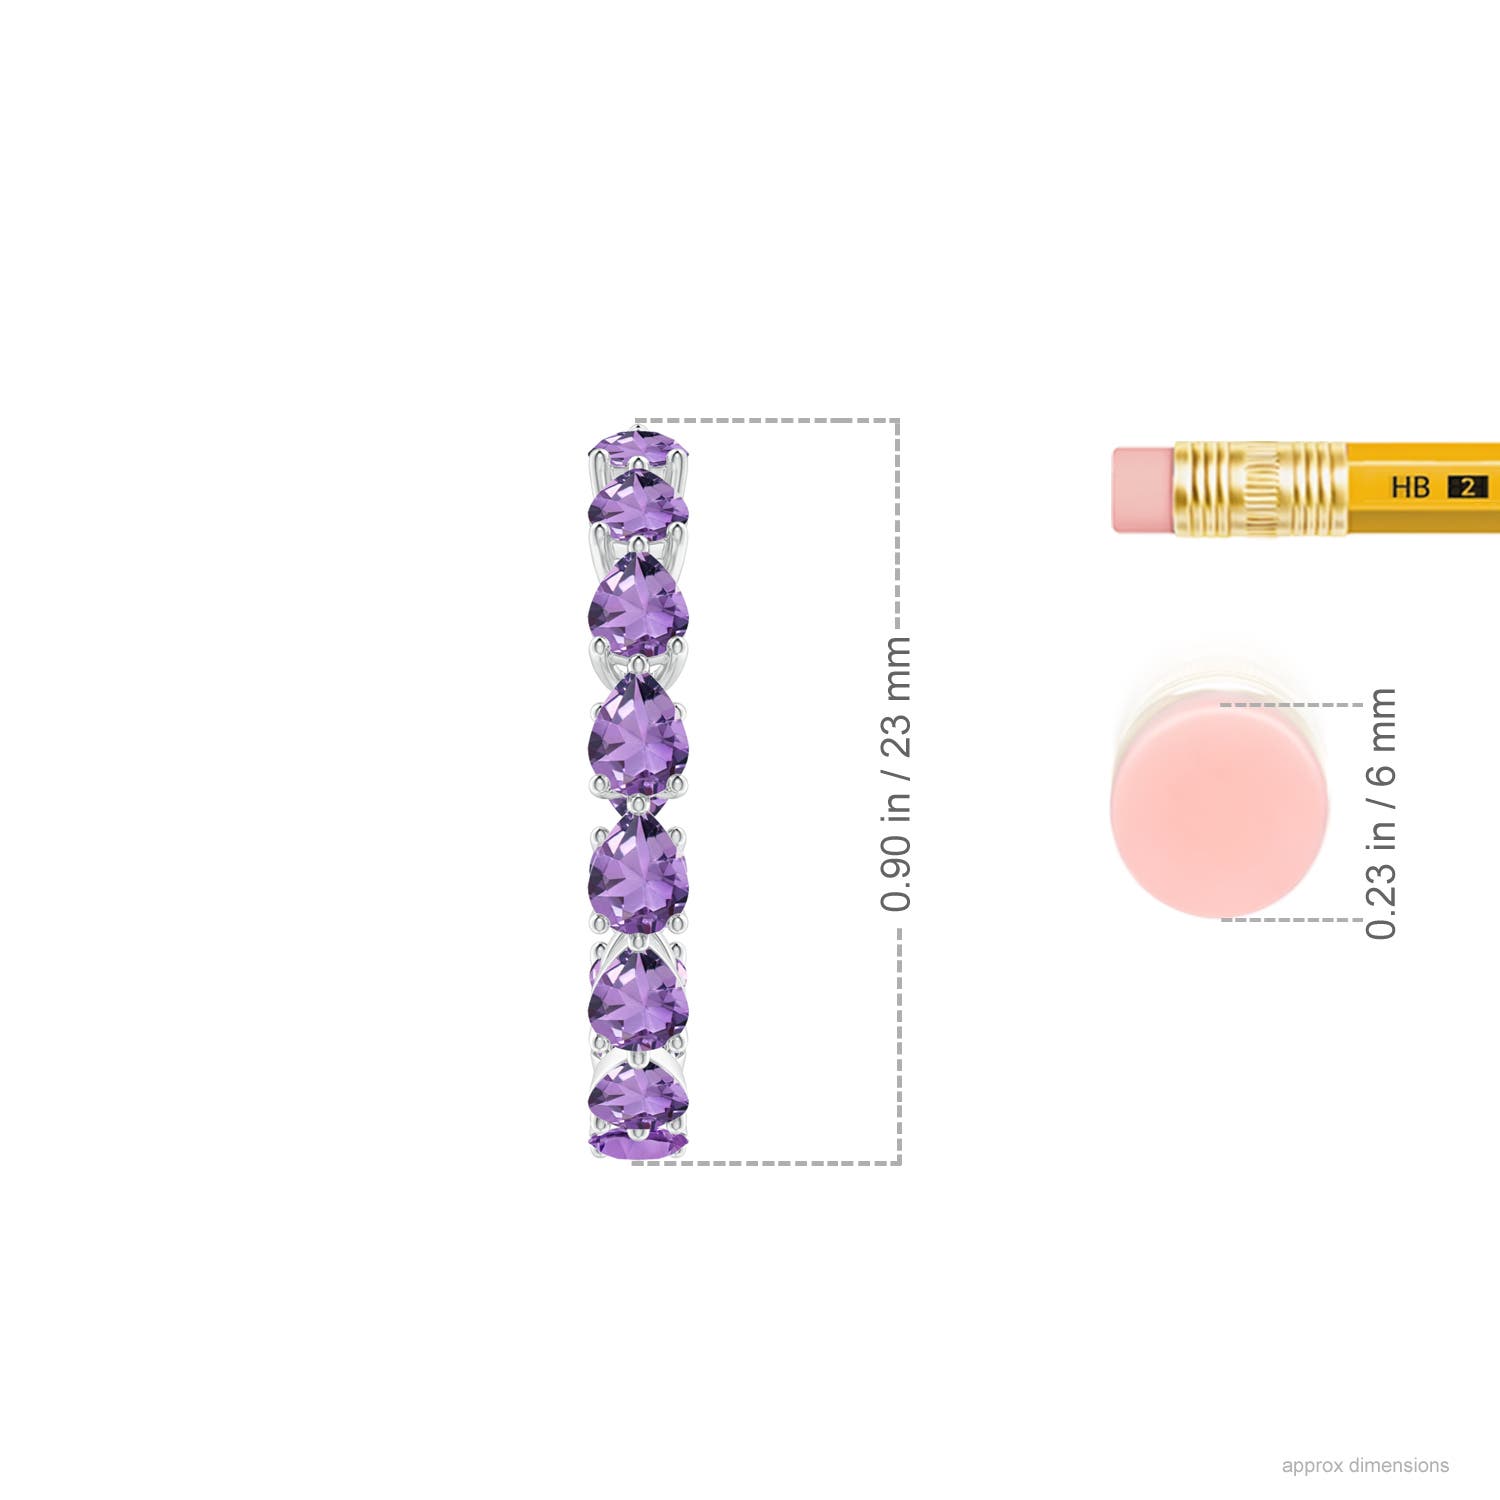 A - Amethyst / 3.12 CT / 14 KT White Gold